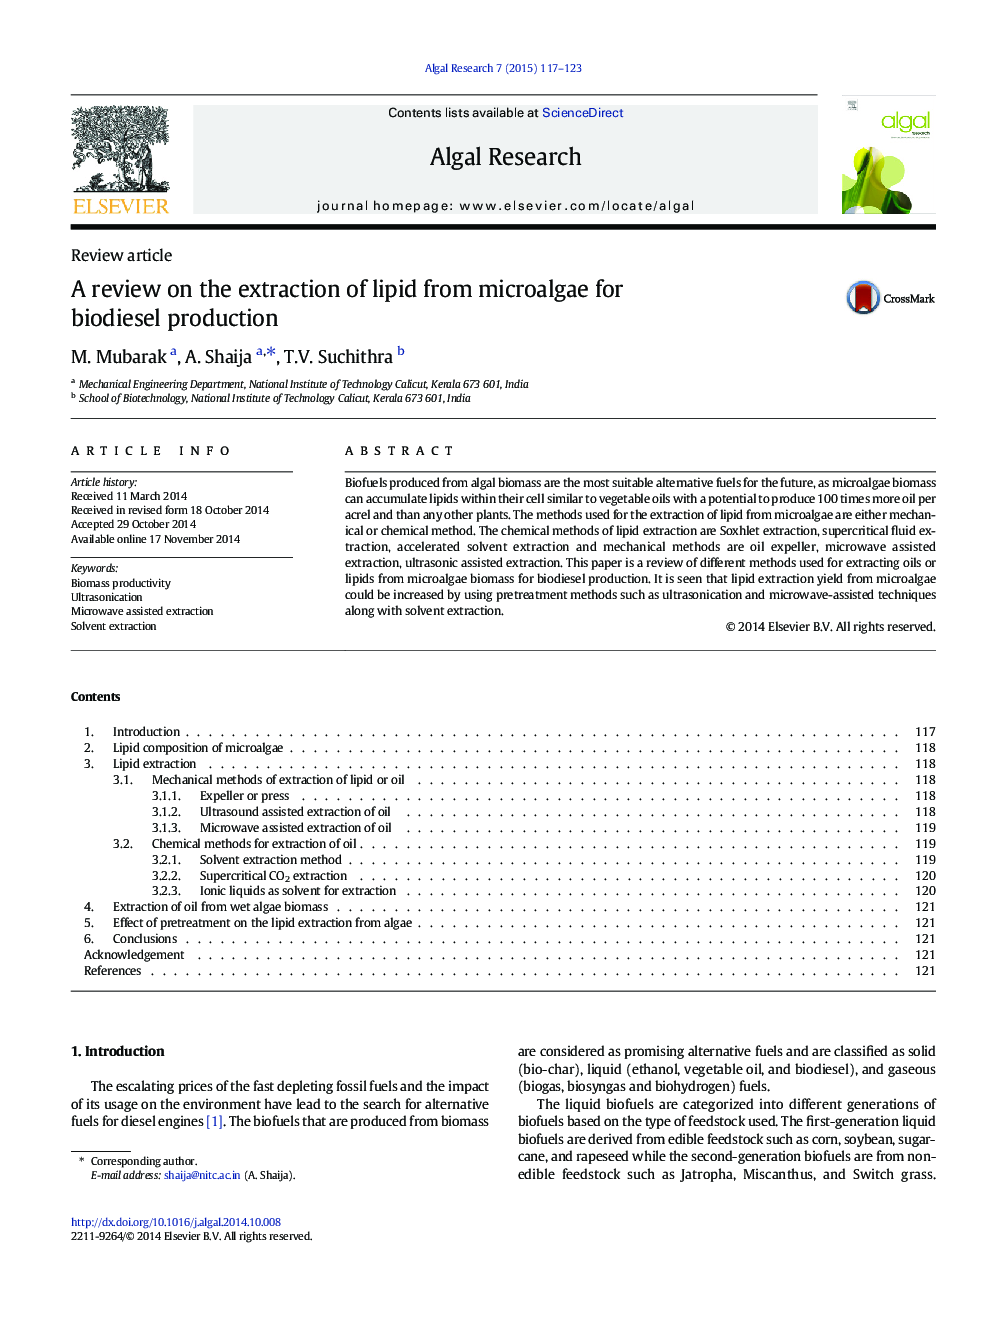 A review on the extraction of lipid from microalgae for biodiesel production